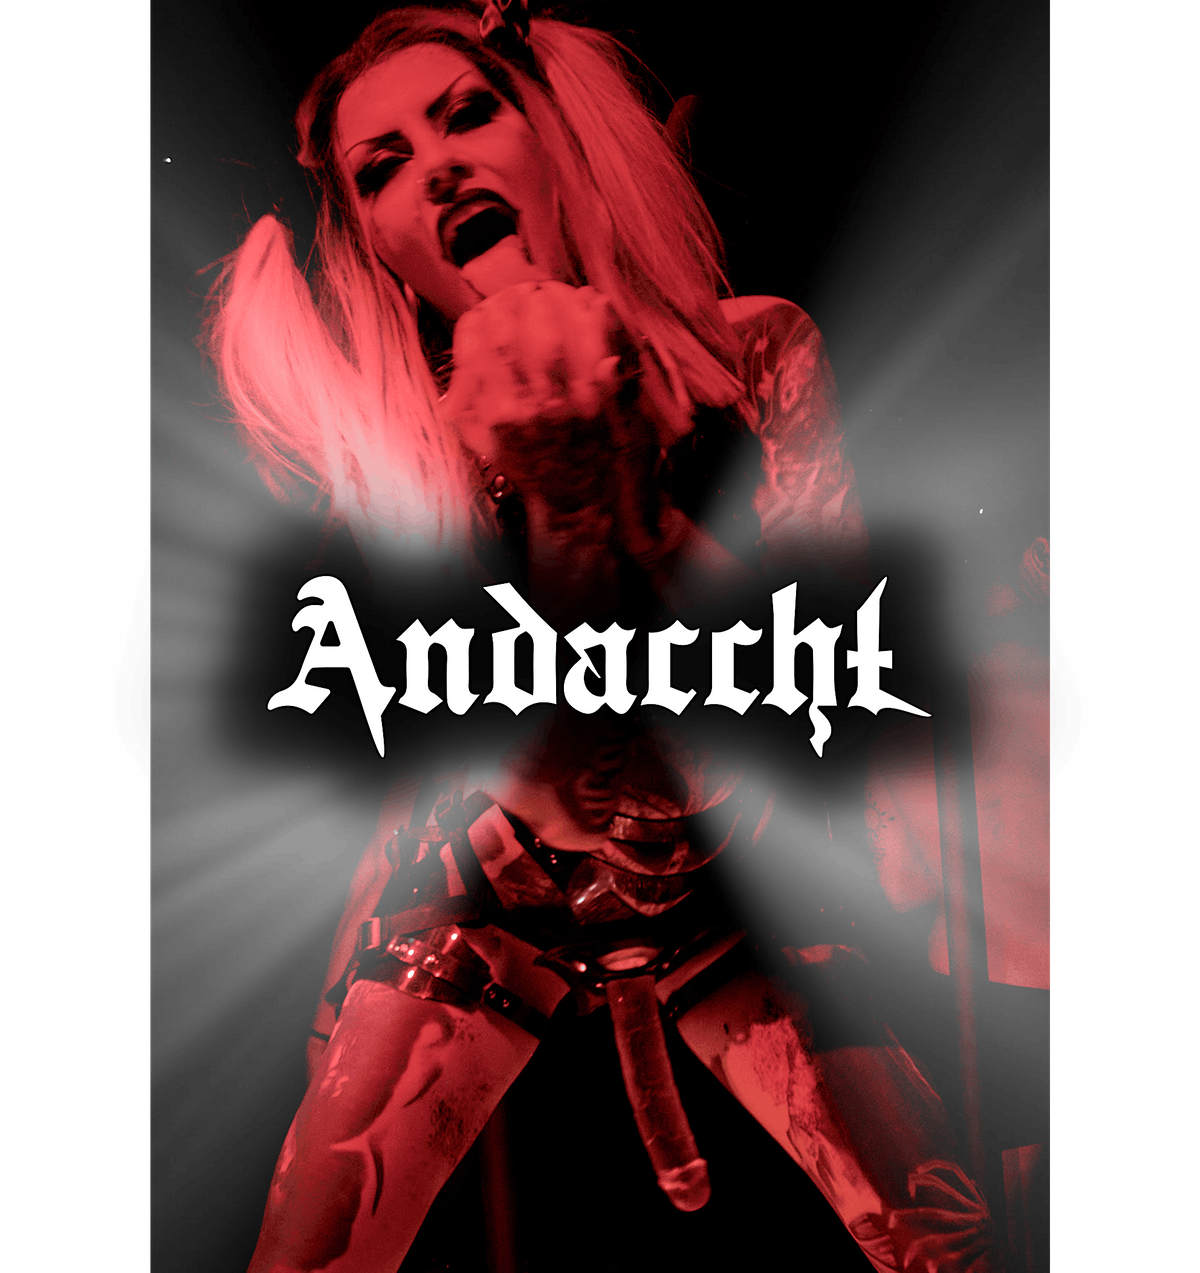 Andaccht